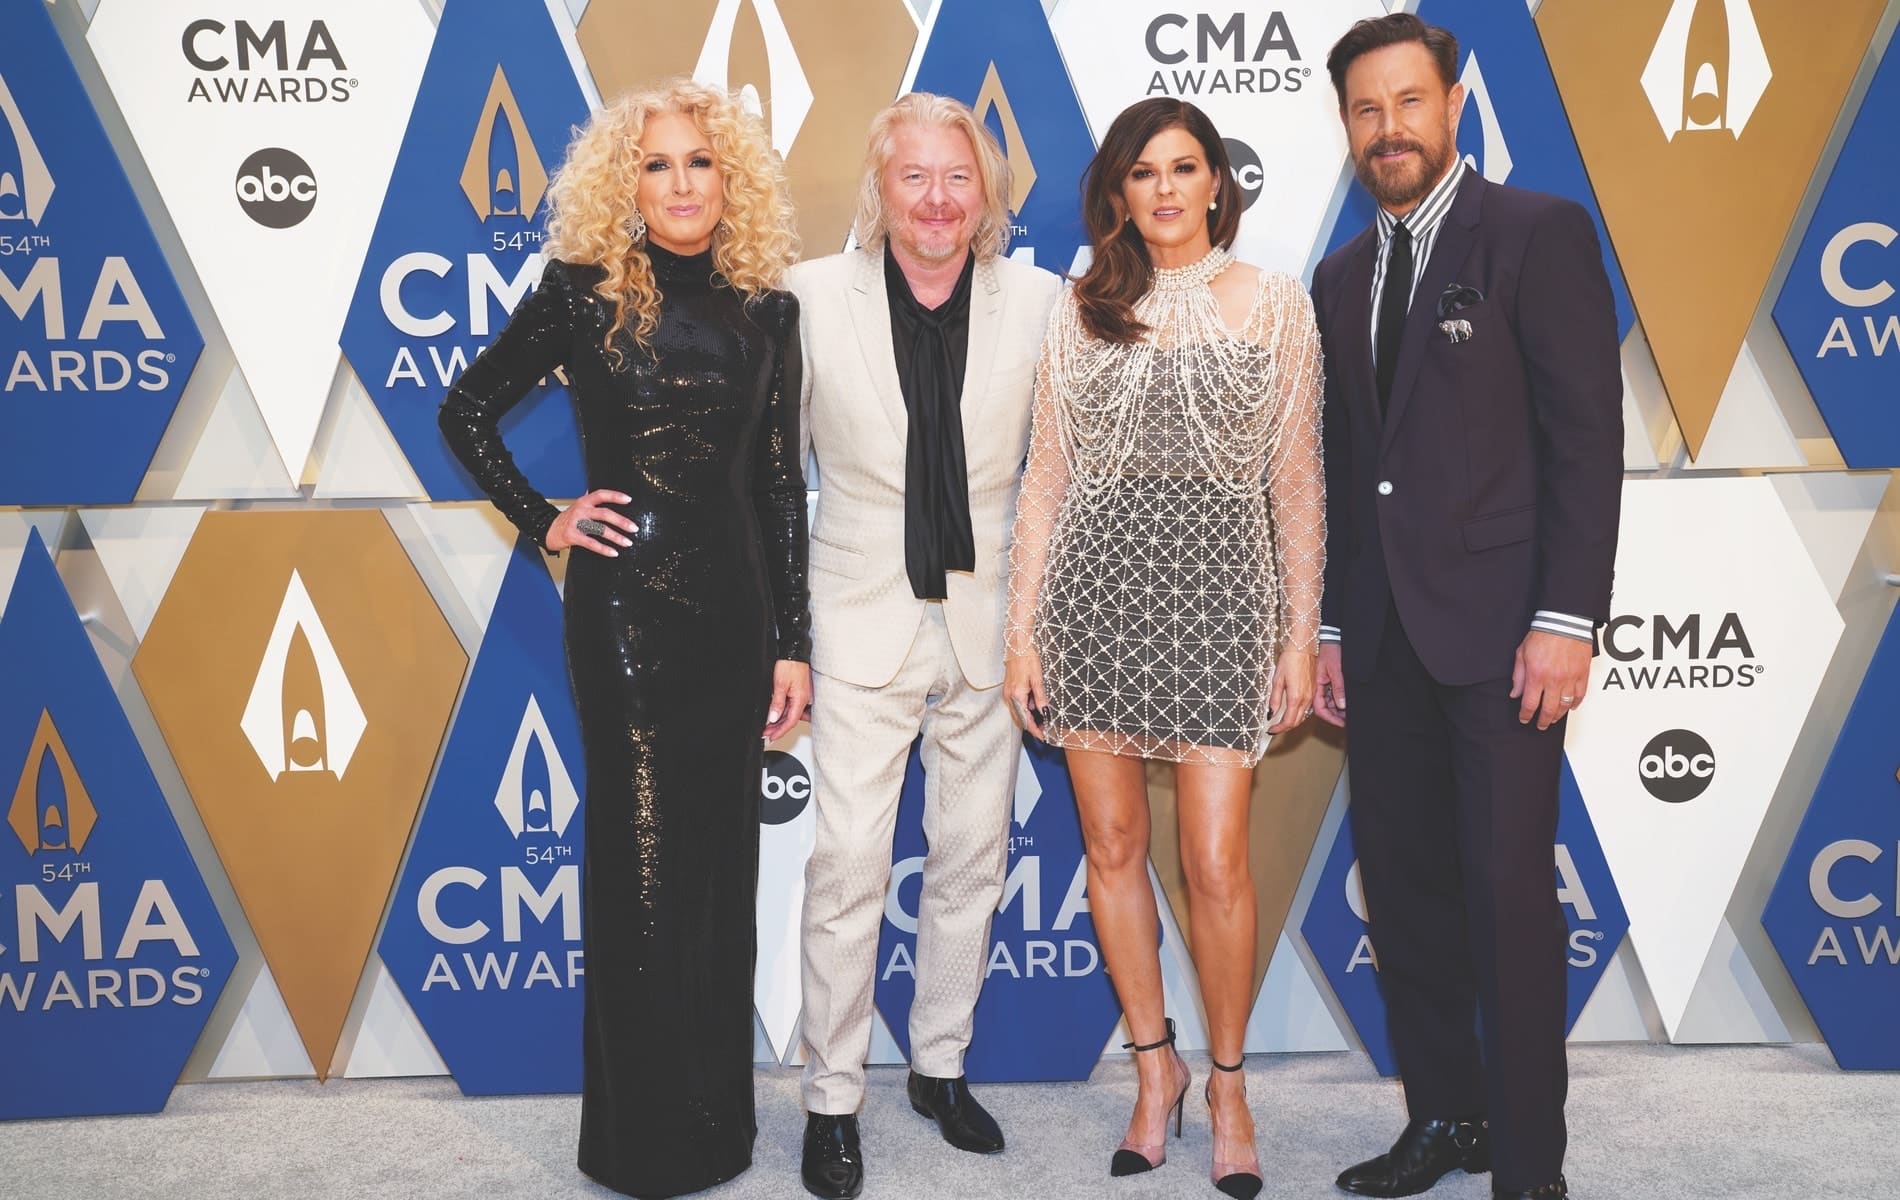 Little Big Town, Country Music Association, Music City Center, 54th Annual Country Music Association Awards, CMA Awards